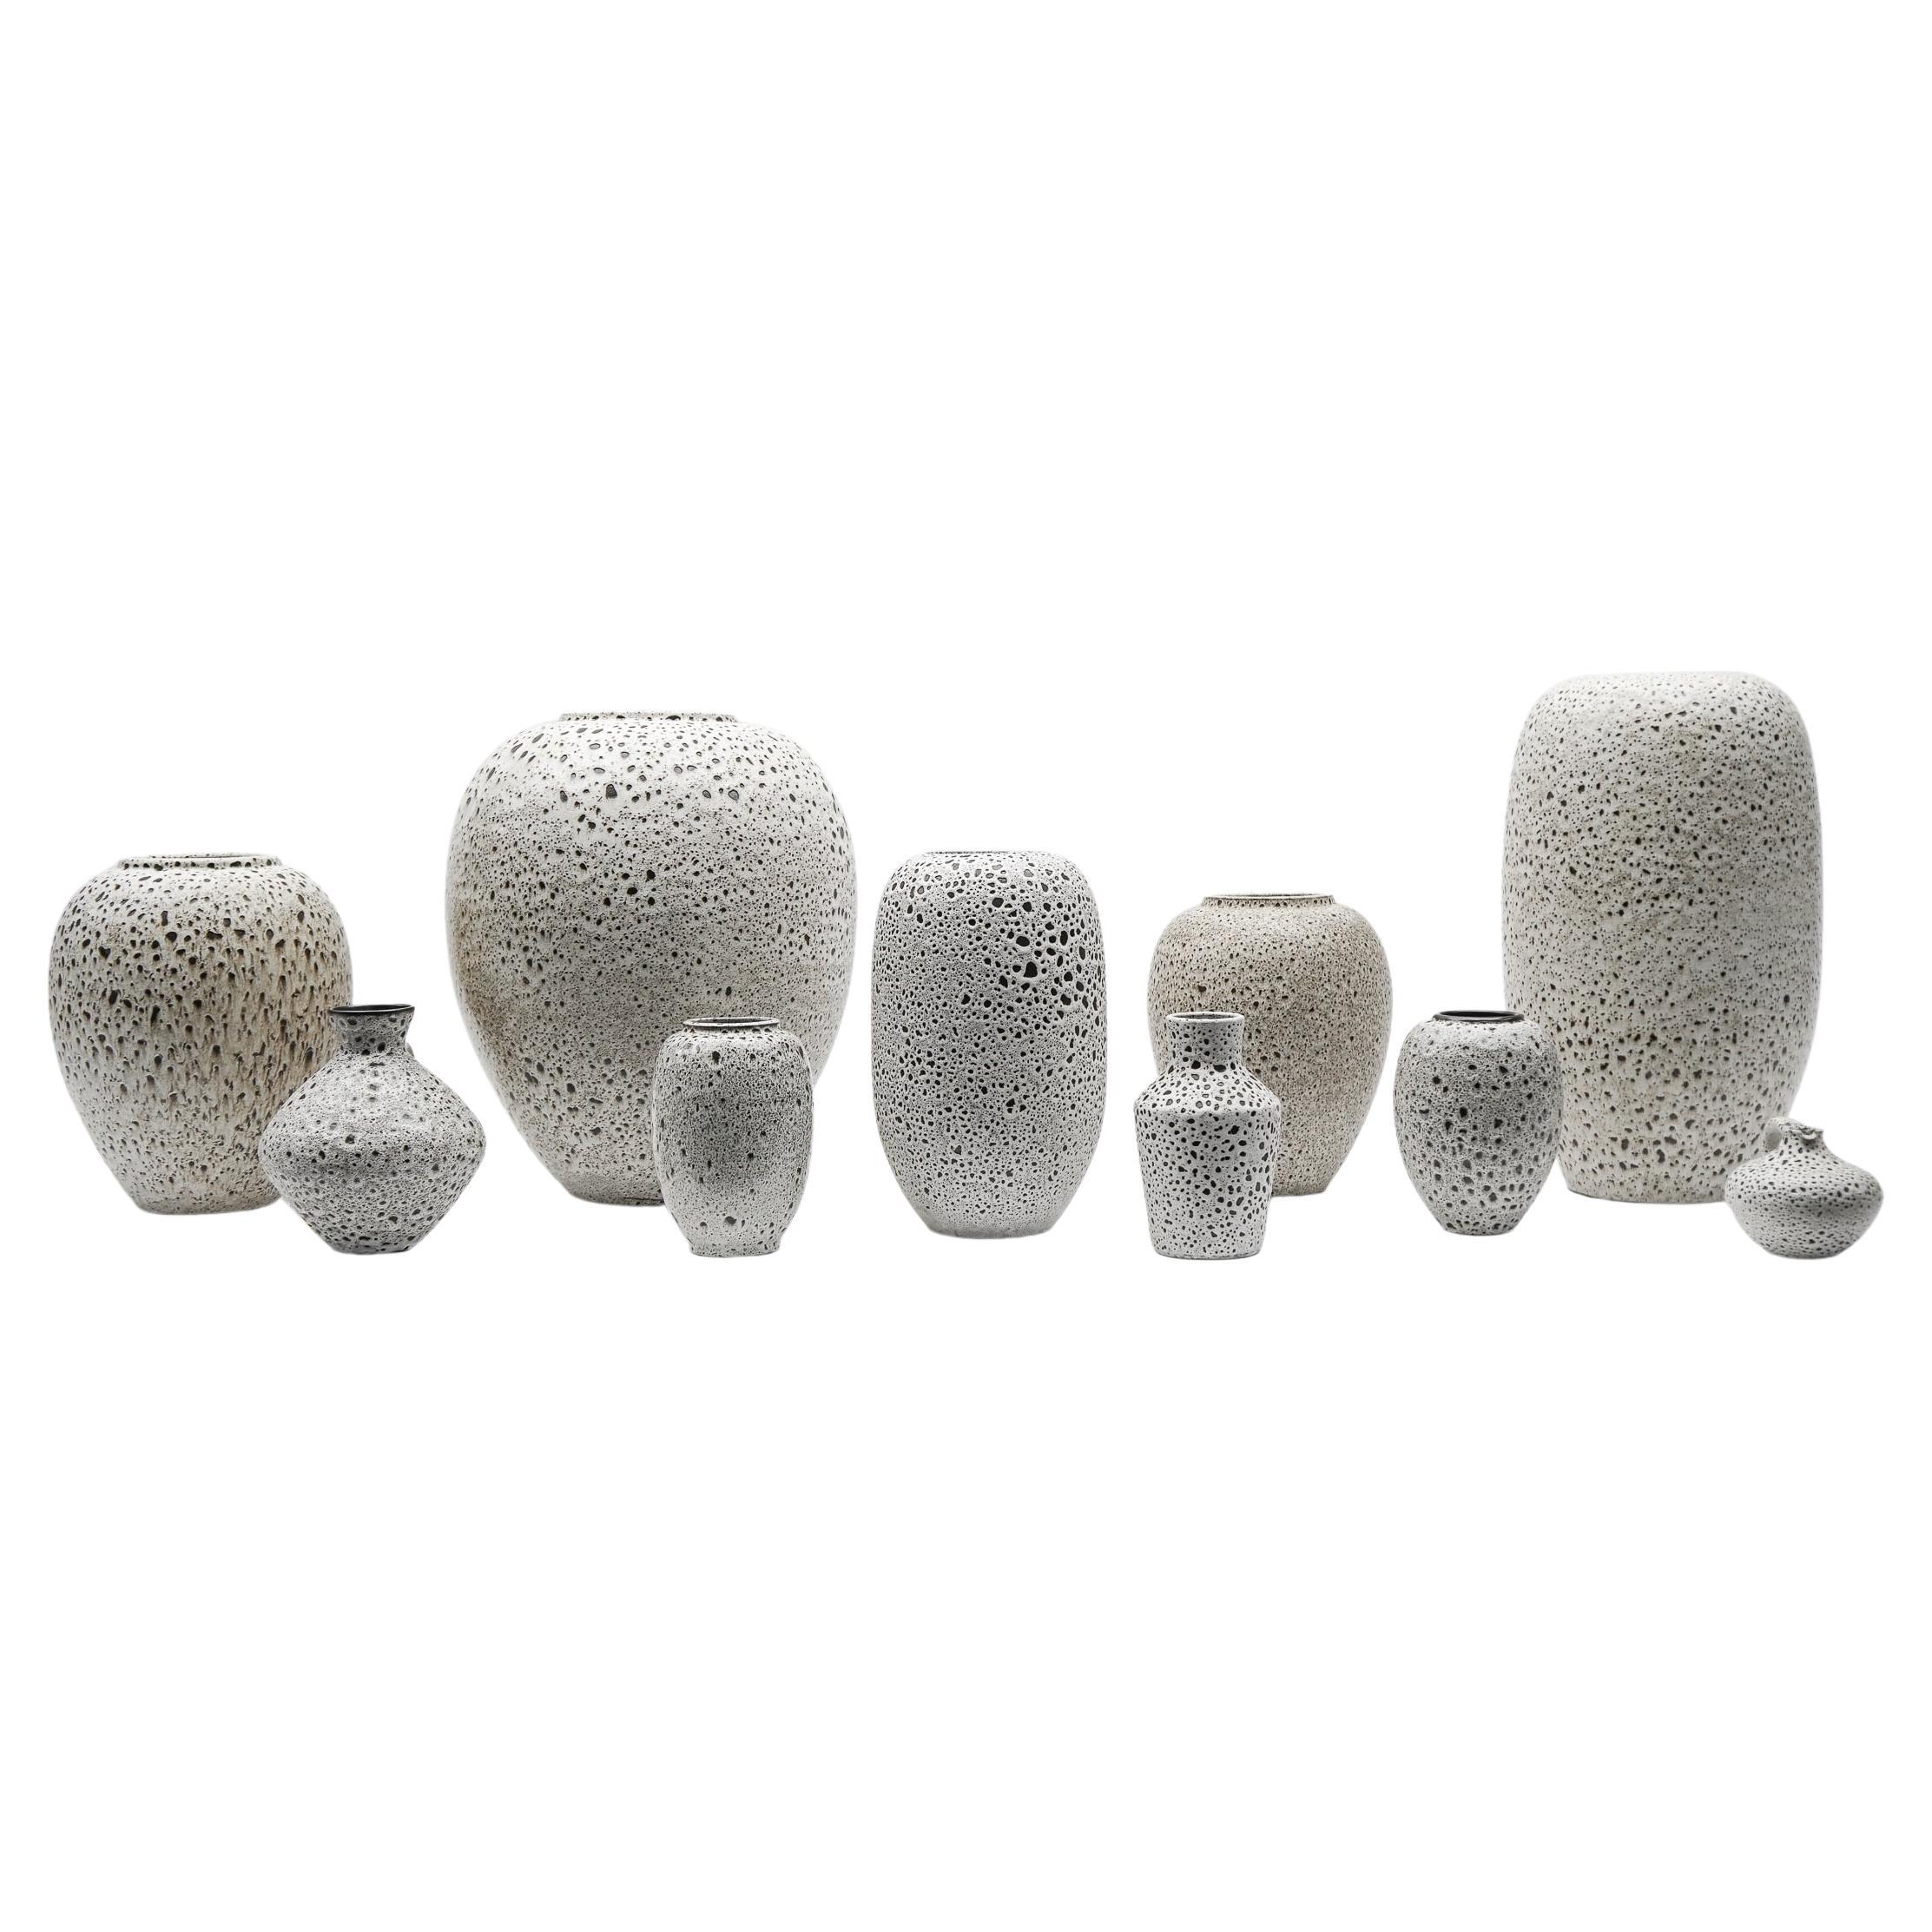 A set of White Studio Ceramic Vases by Wilhelm & Elly Kuch, 1960s, Germany For Sale